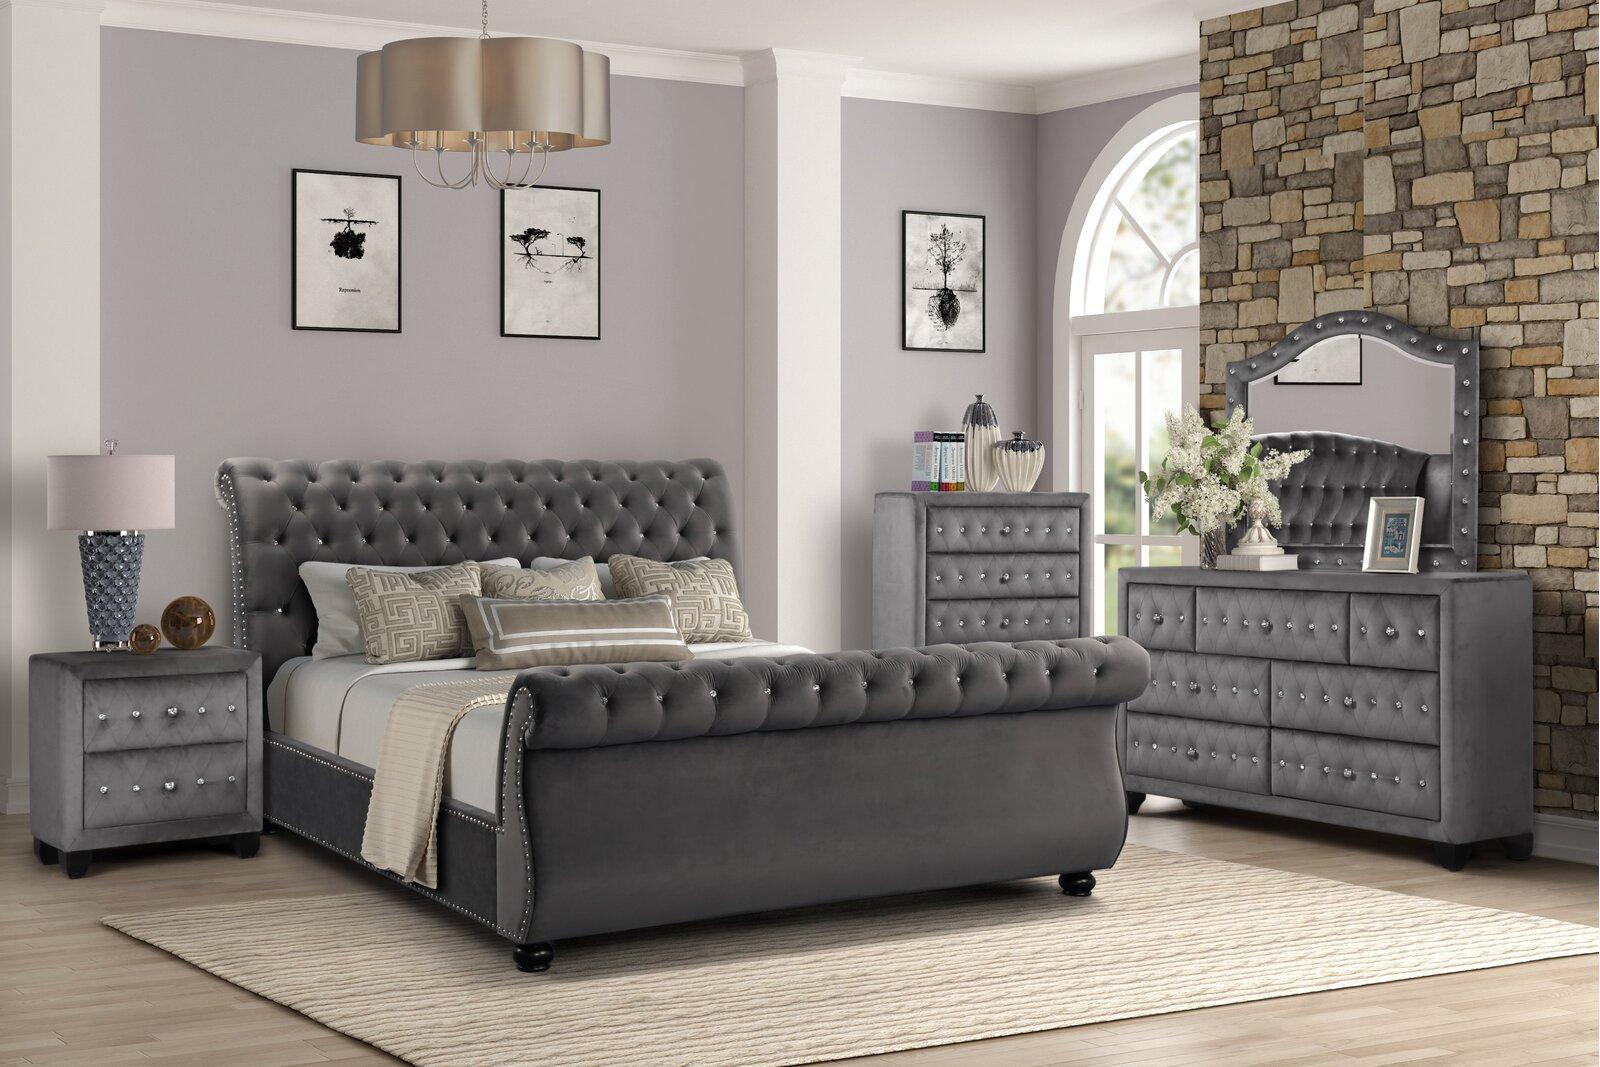 Contemporary, Modern Sleight Bedroom Set KENDALL GHF-808857587787-Set-4 in Gray 